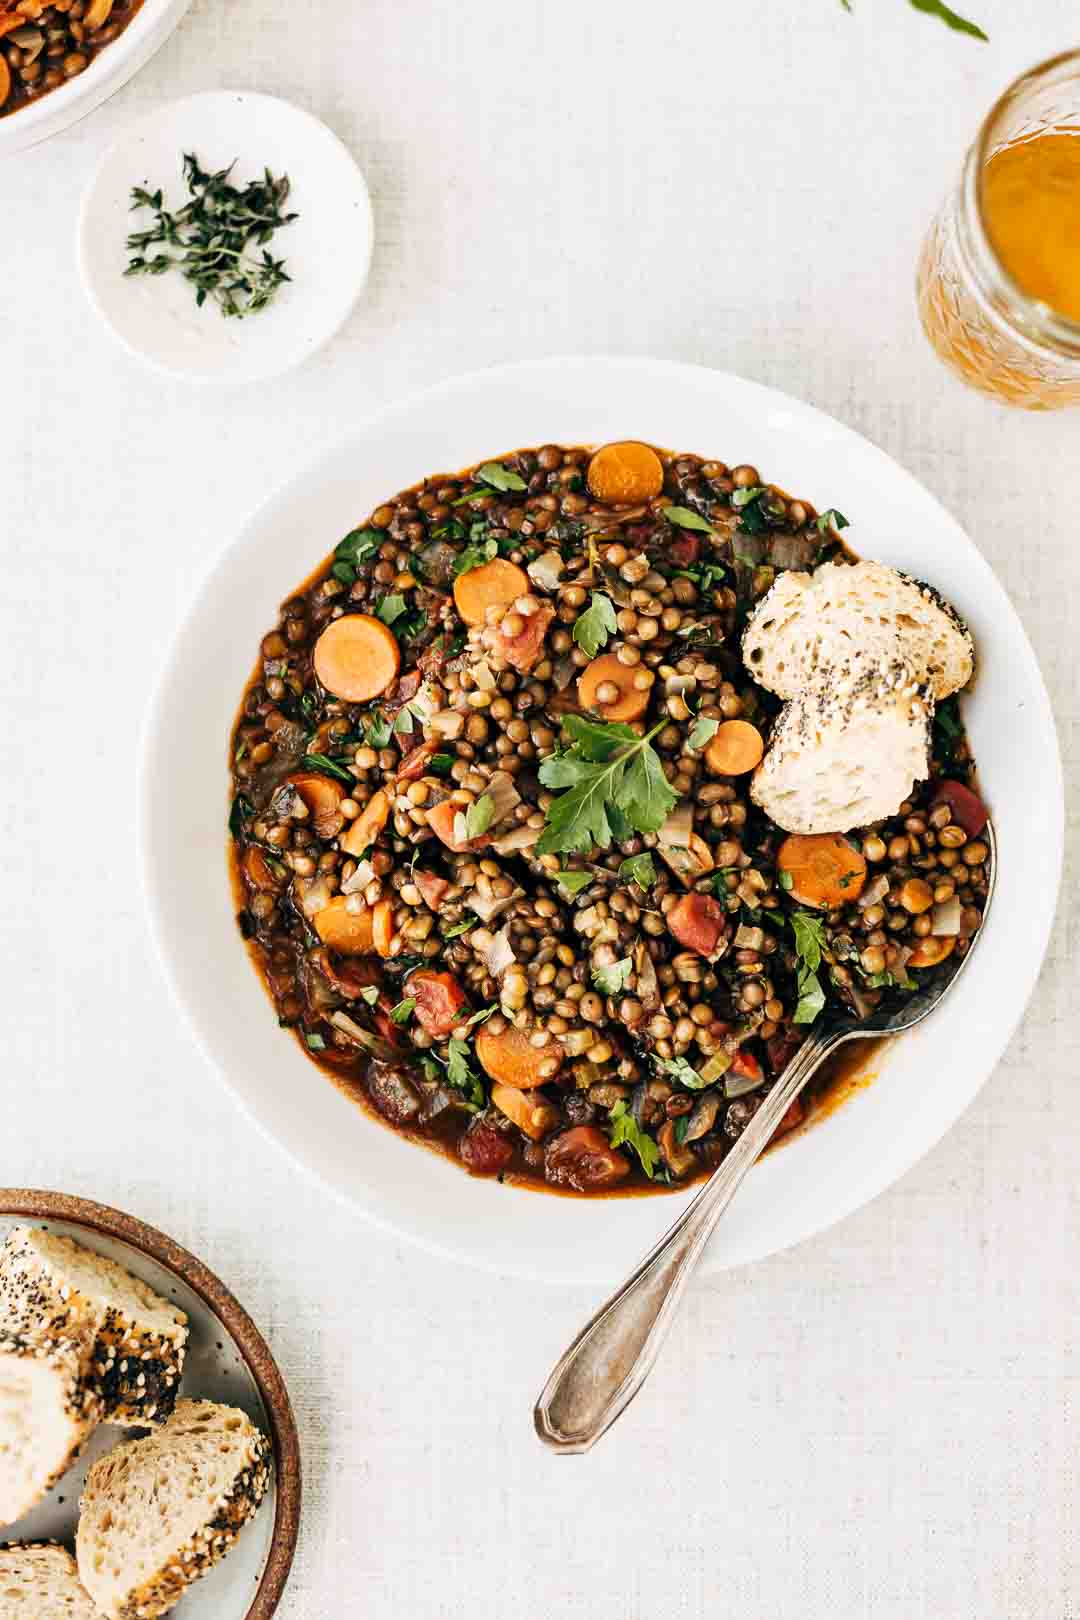 A bowl of French Lentil soup with bread on the side